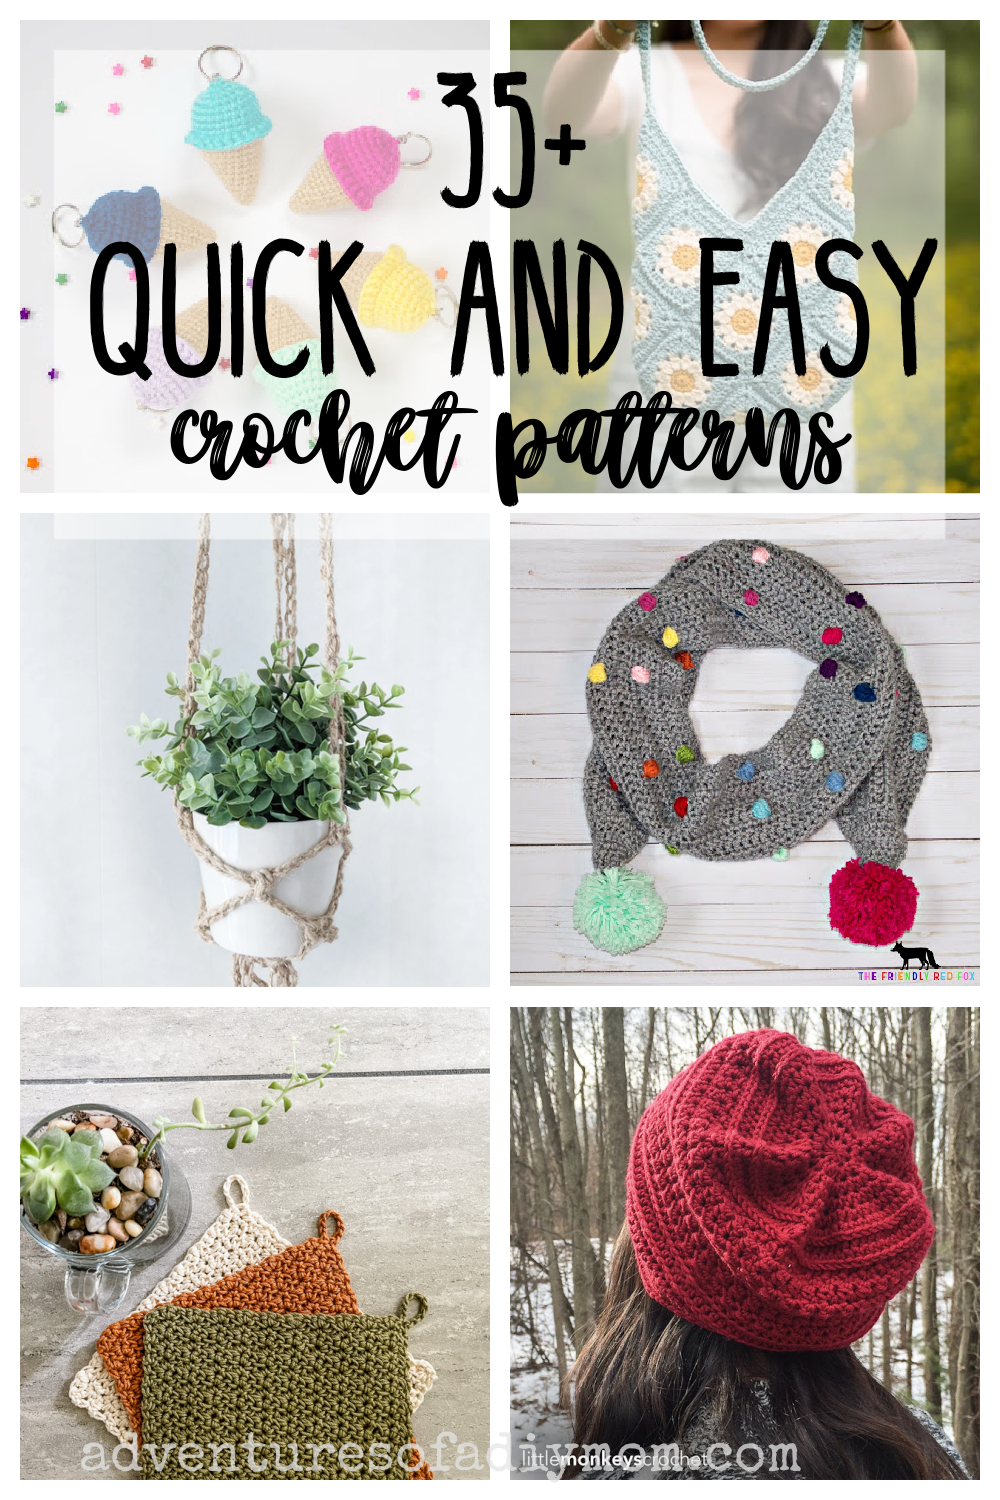 15 Lovely Crochet Stitches for Beginners - TL Yarn Crafts